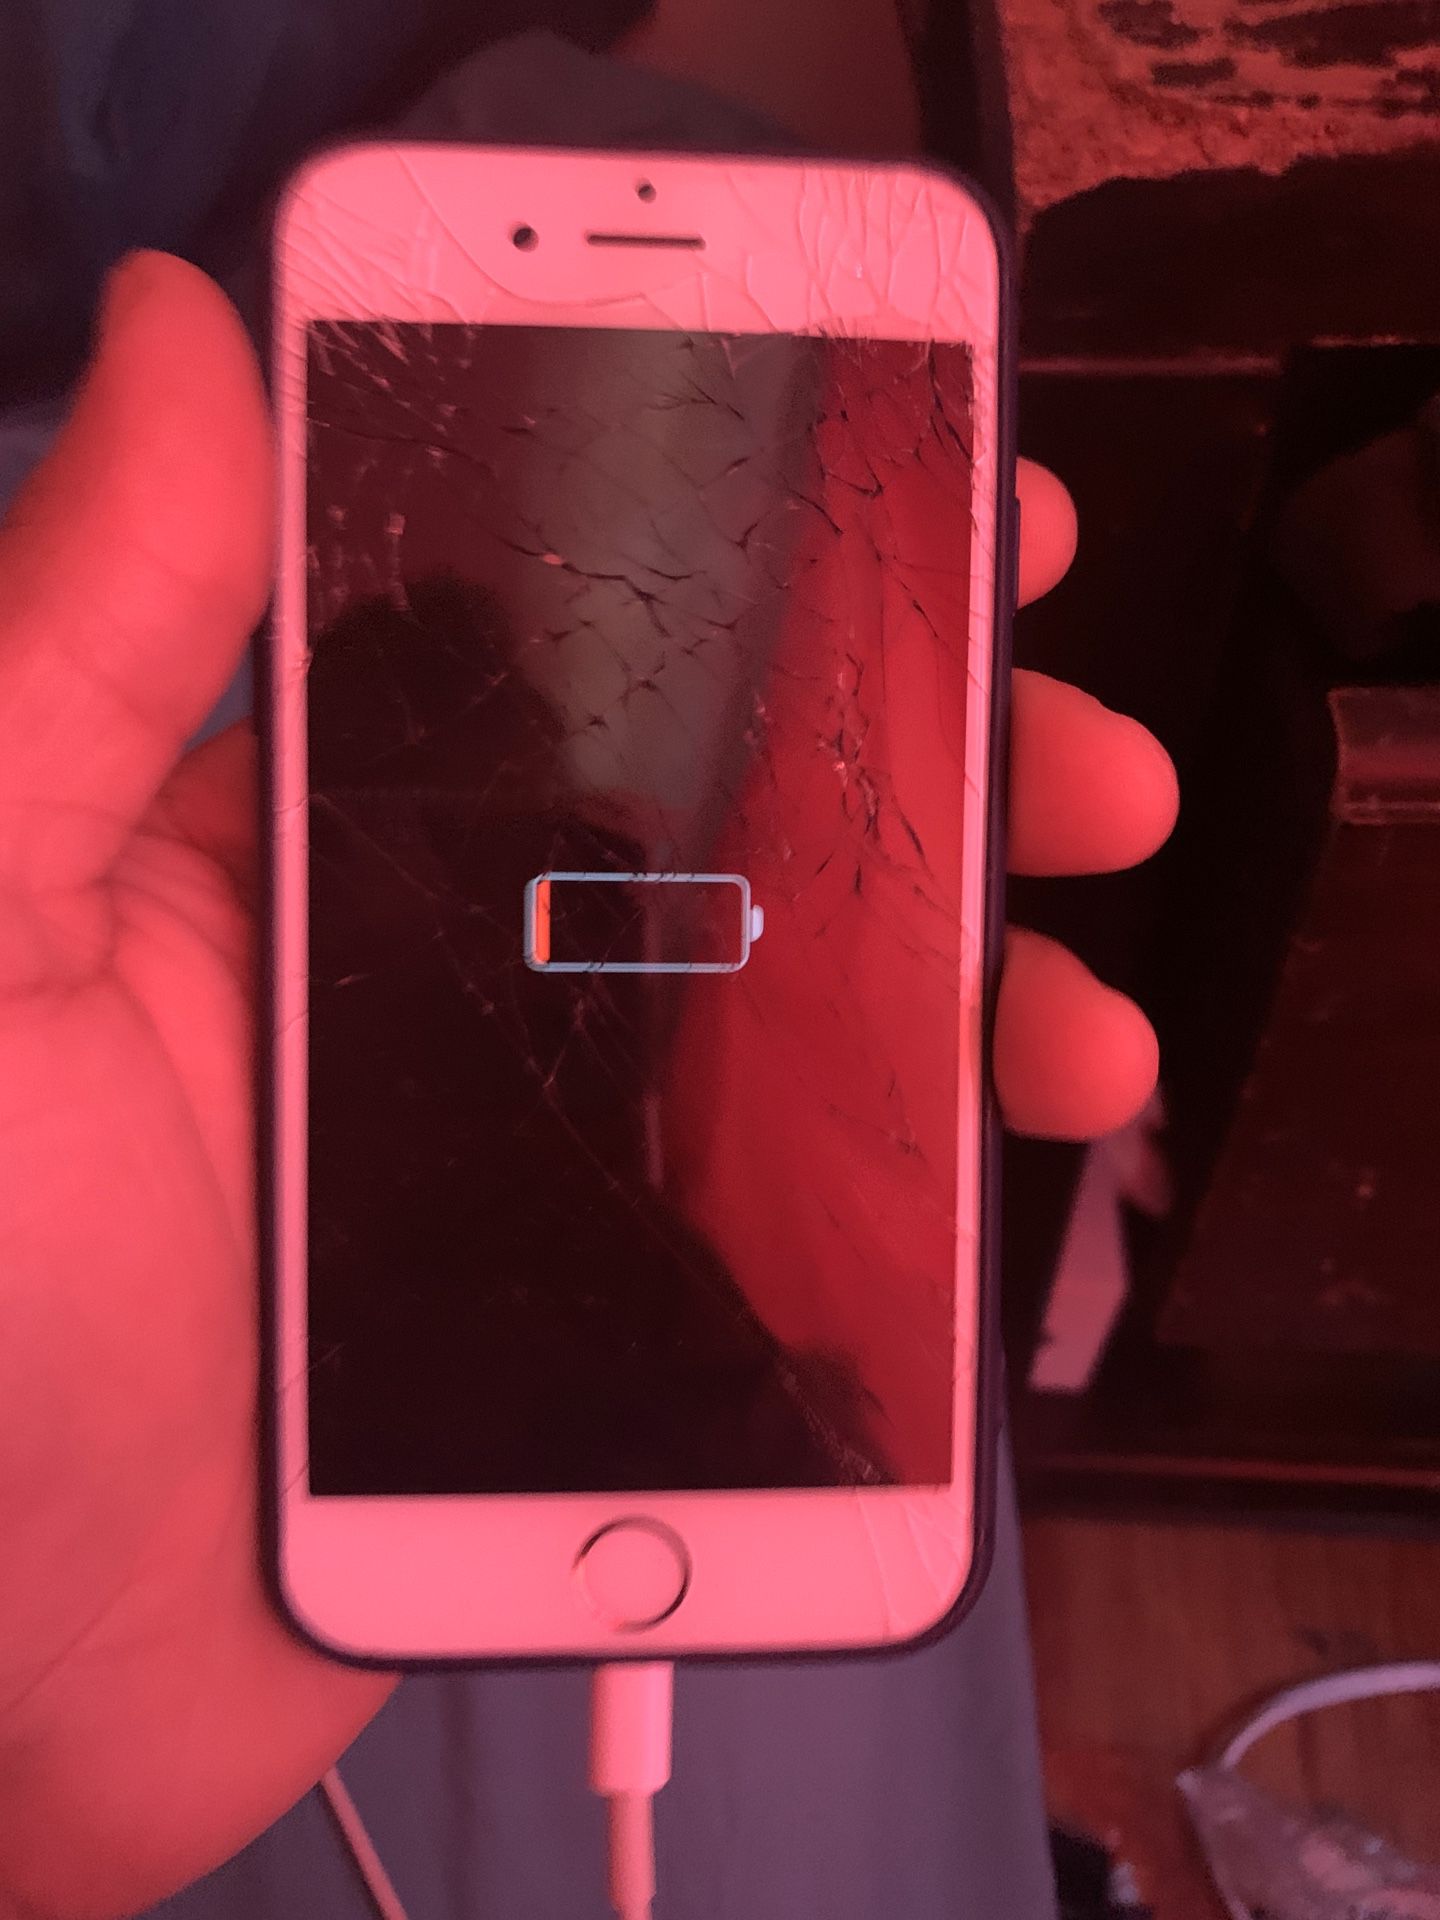 iPhone 6 unlocked needs a new screen but works and can still use